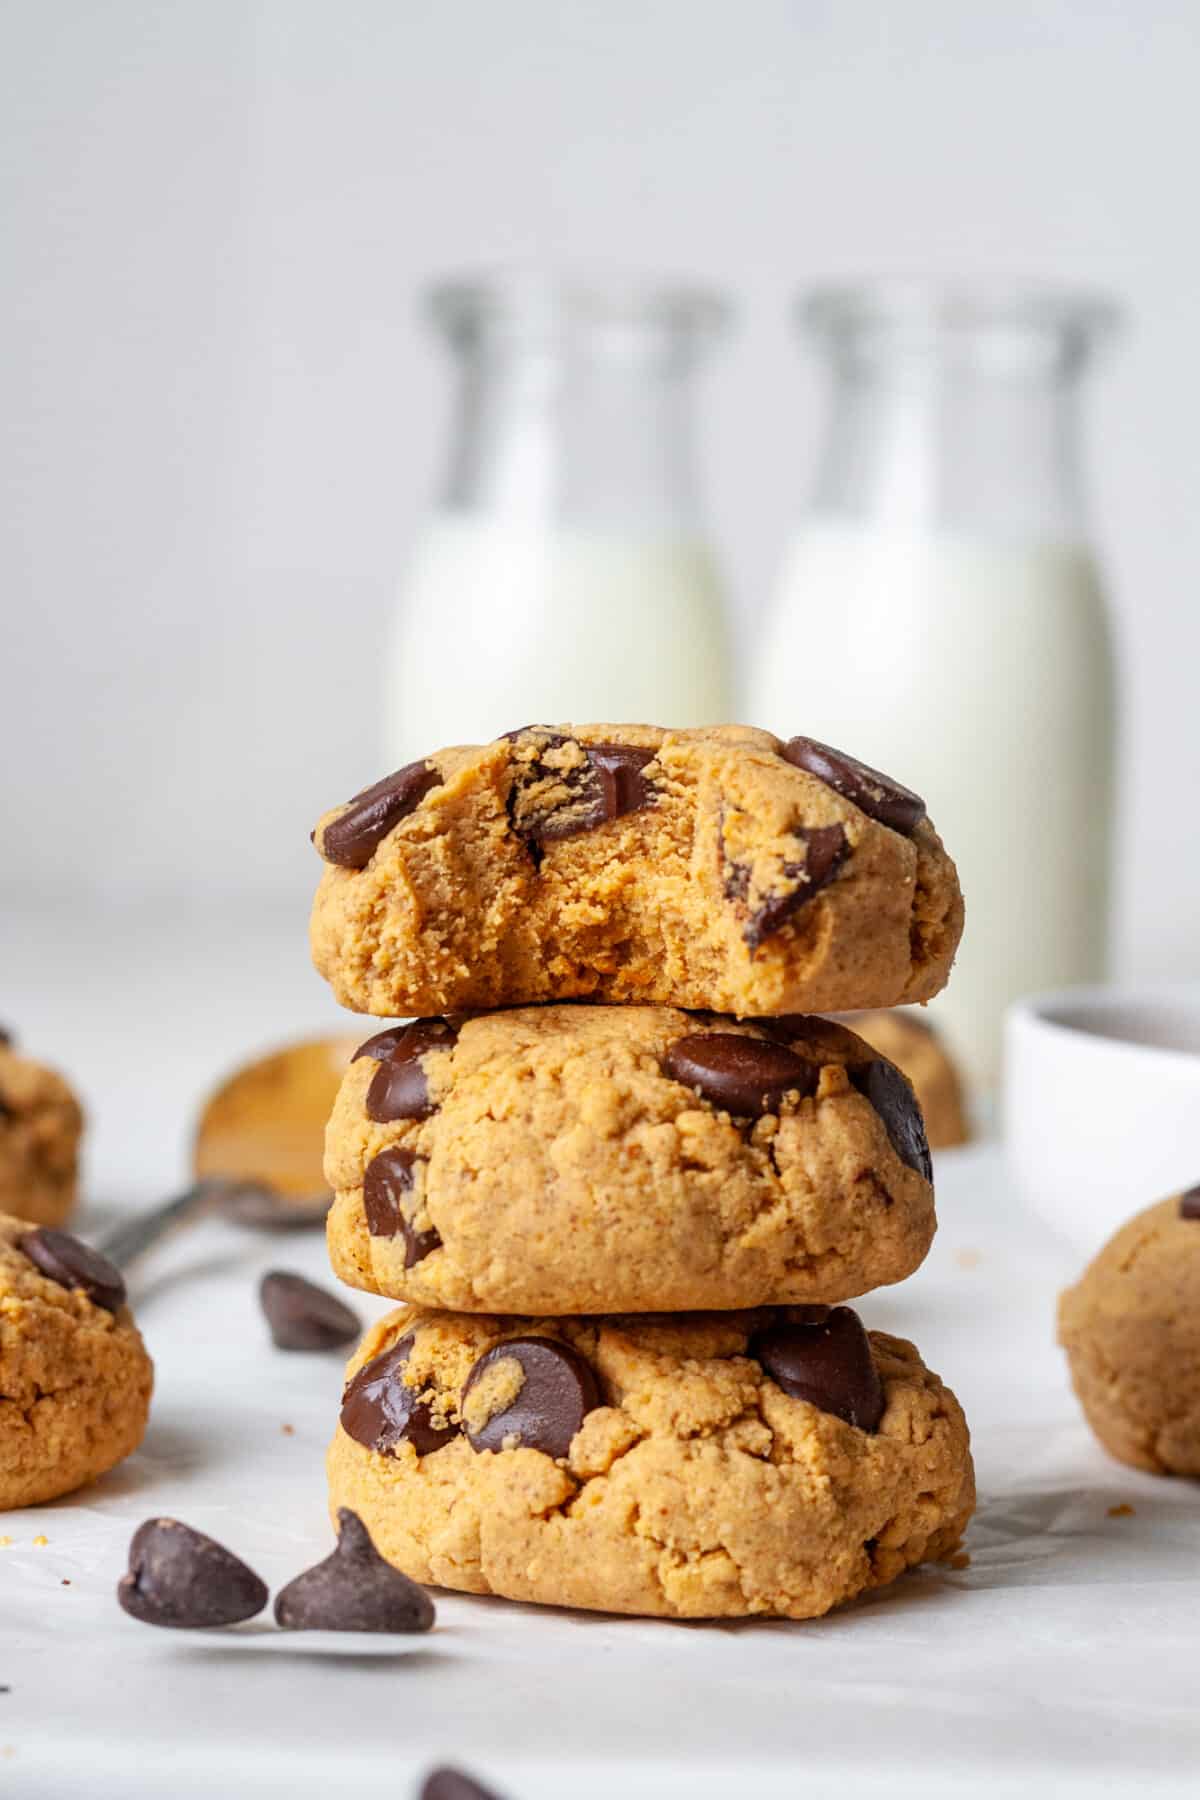 Three protein chocolate chip cookies stacked together with two bottles of milk in the background.